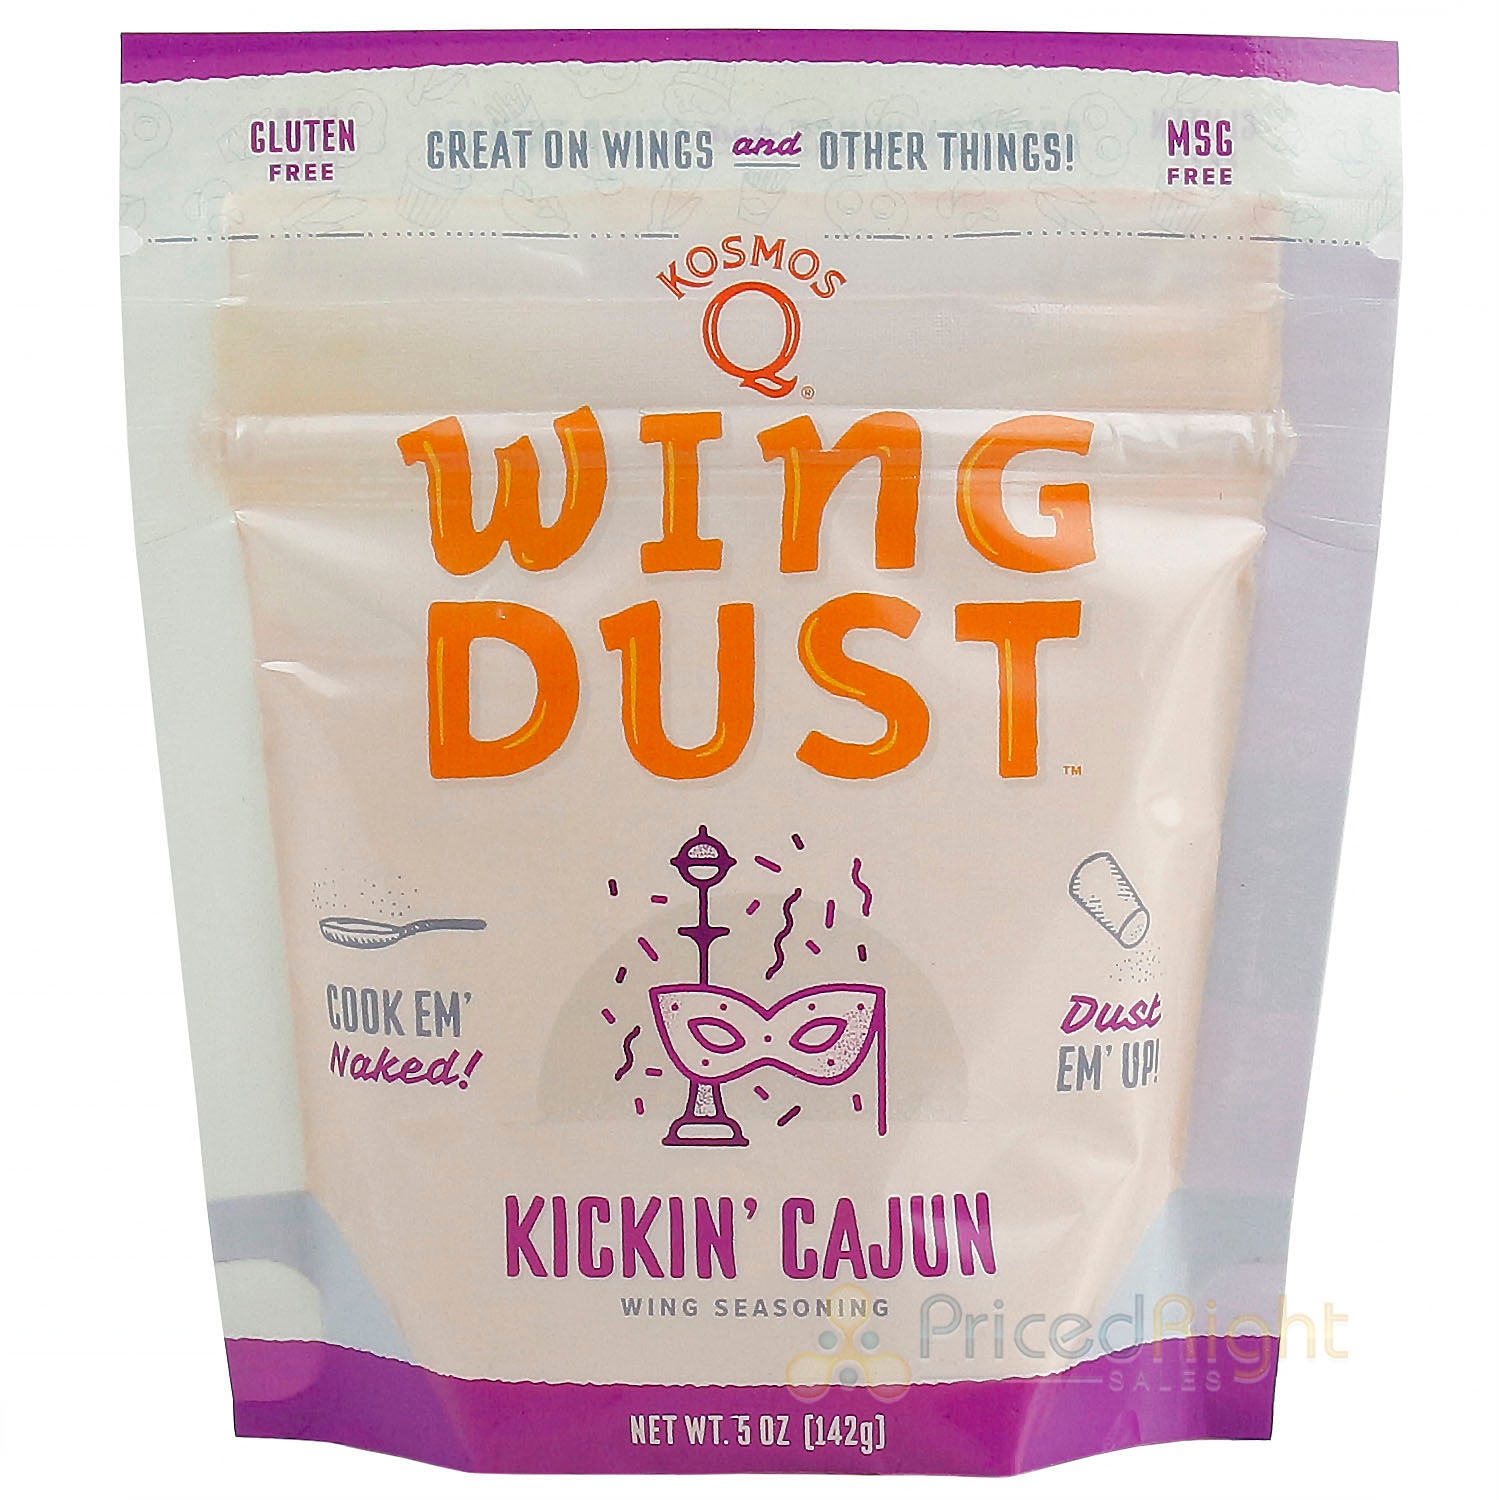 How to cook Chicken Wings using Kosmos Q Wing Dust 